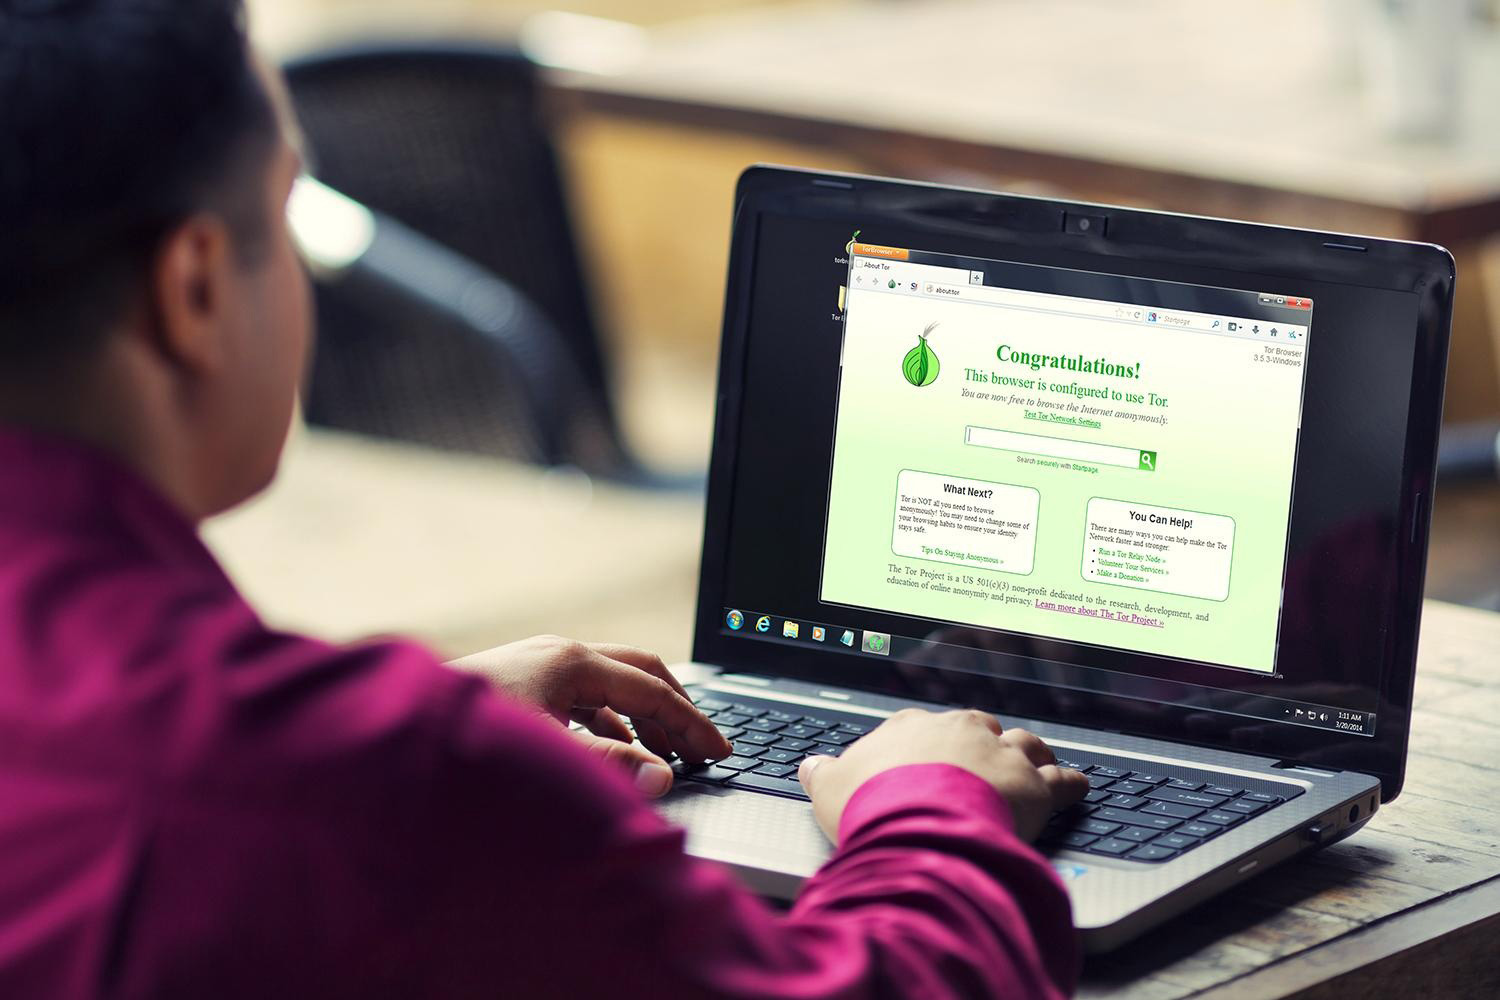 A person using a browser that is configured to use Tor, on a laptop.